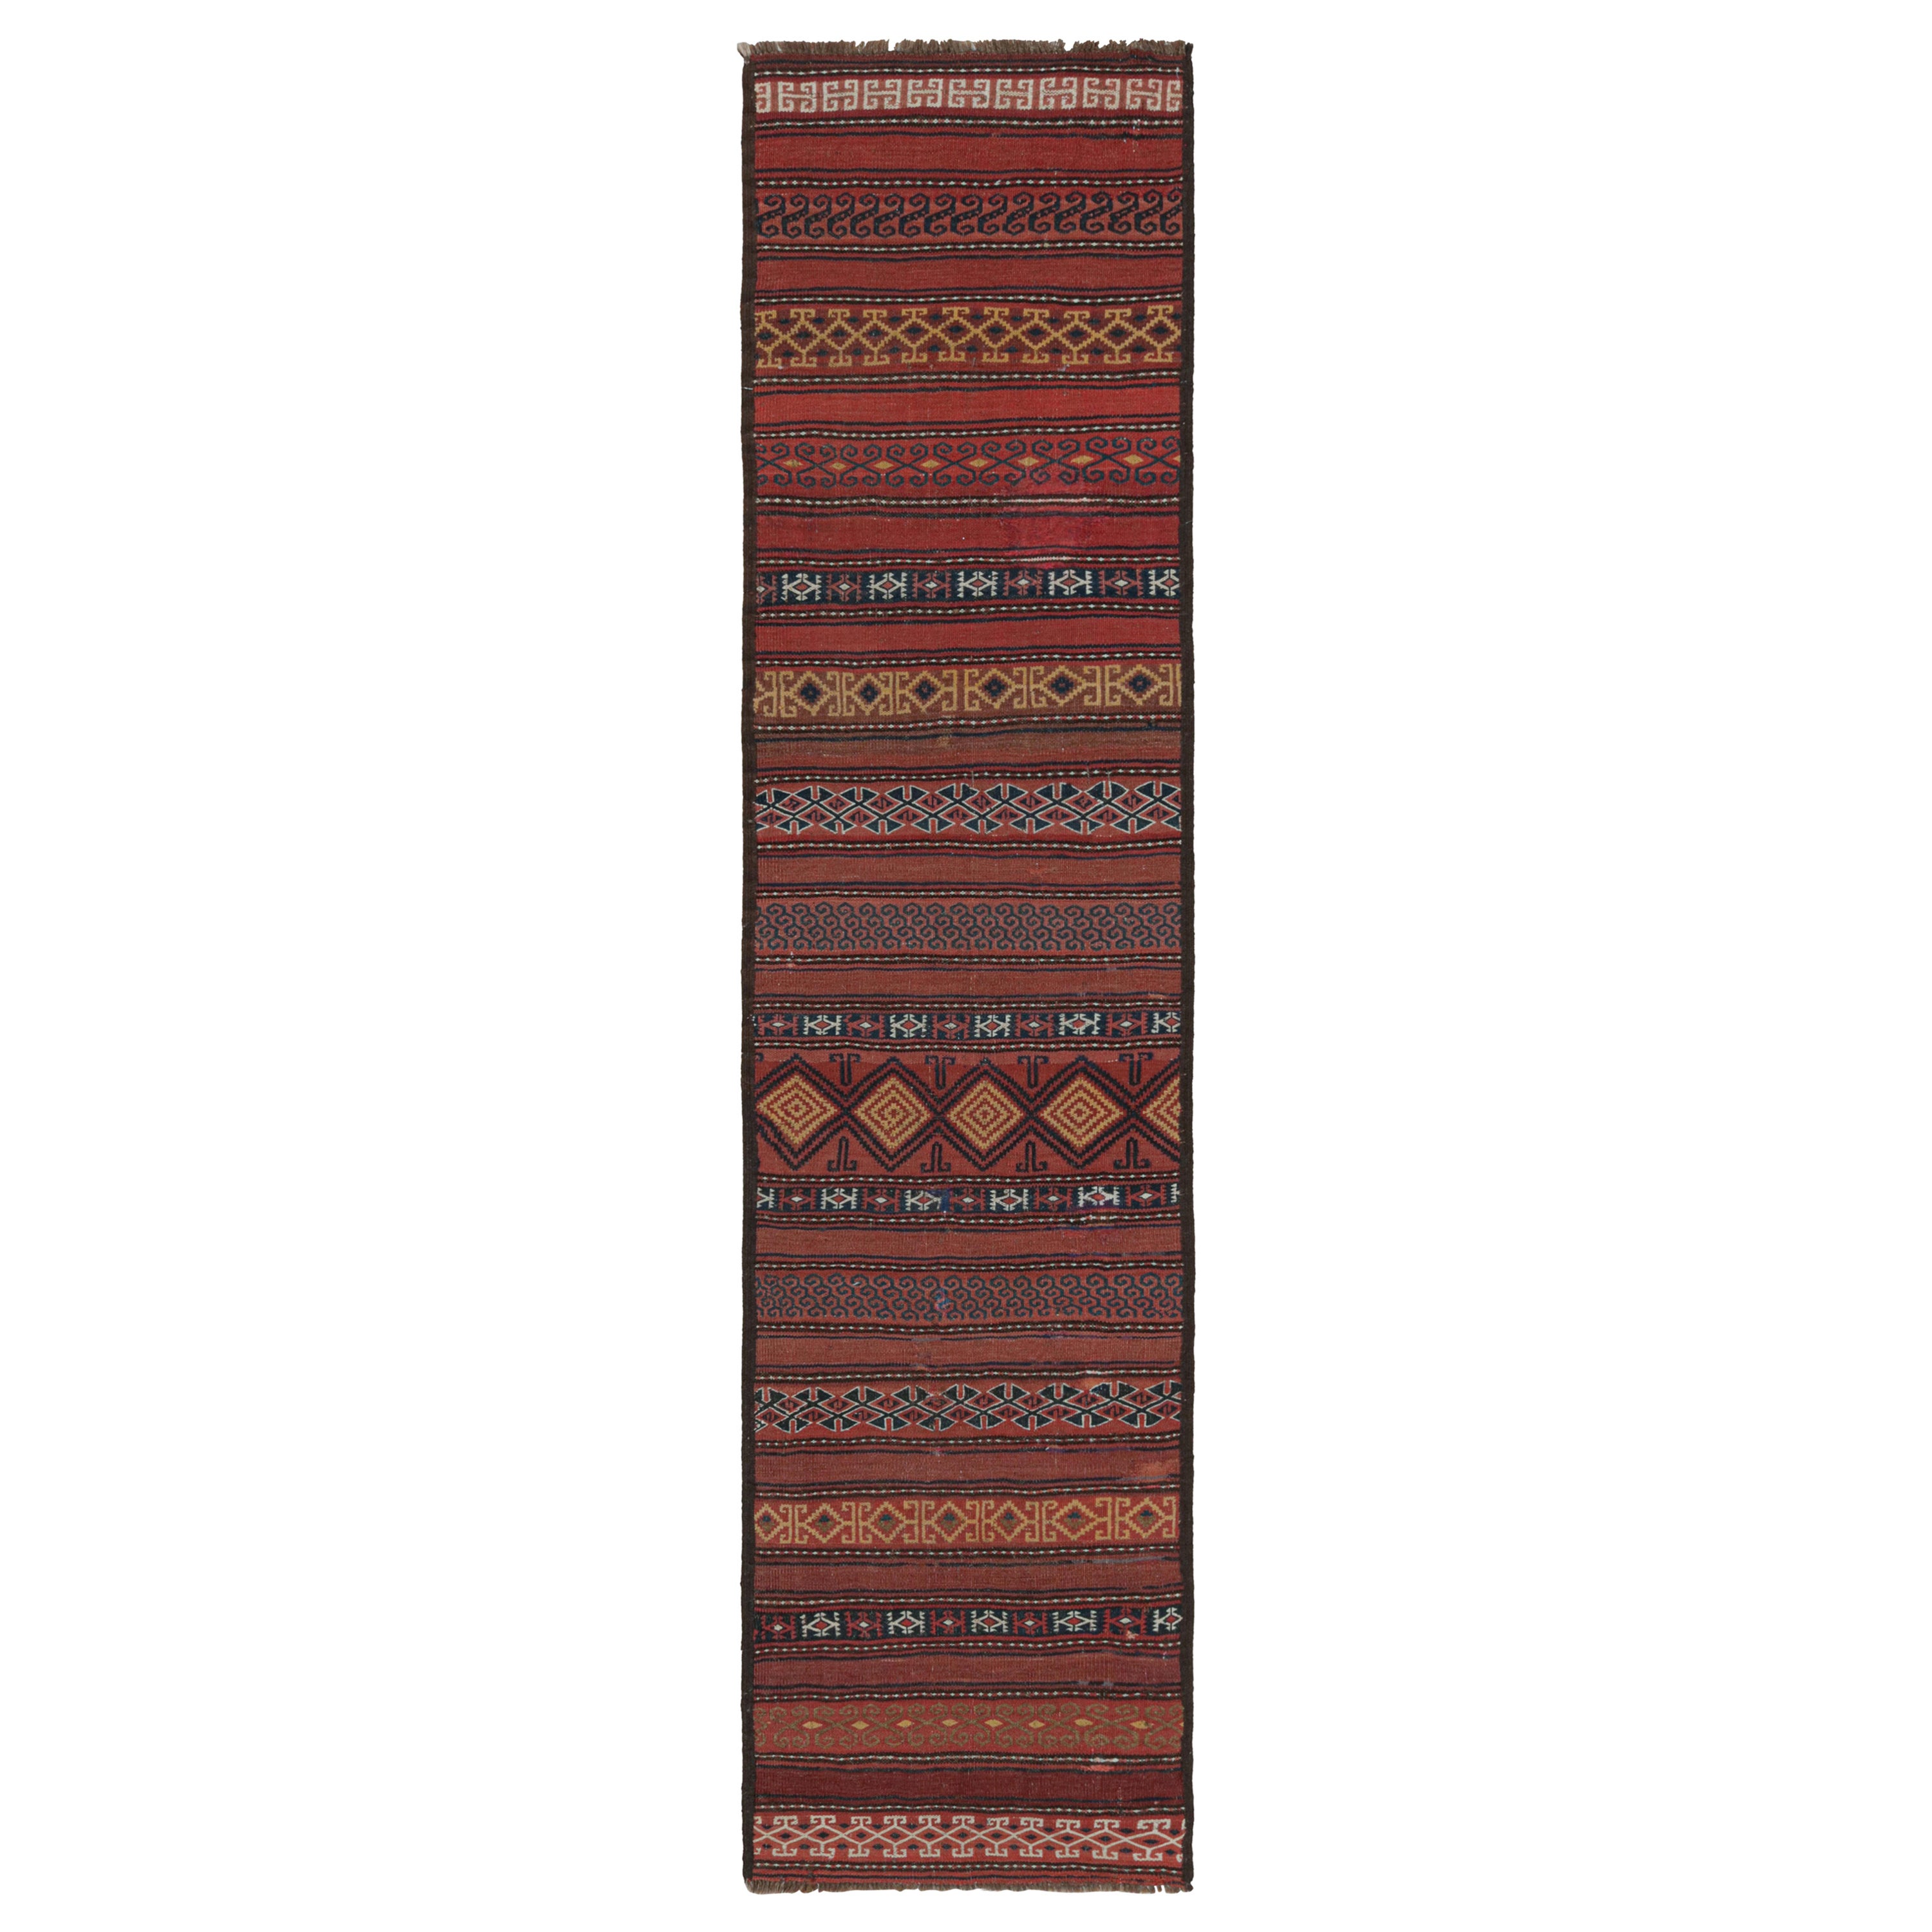 Vintage Kilim Runner Rug in Brick Red with Geometric Patterns, from Rug & Kilim For Sale